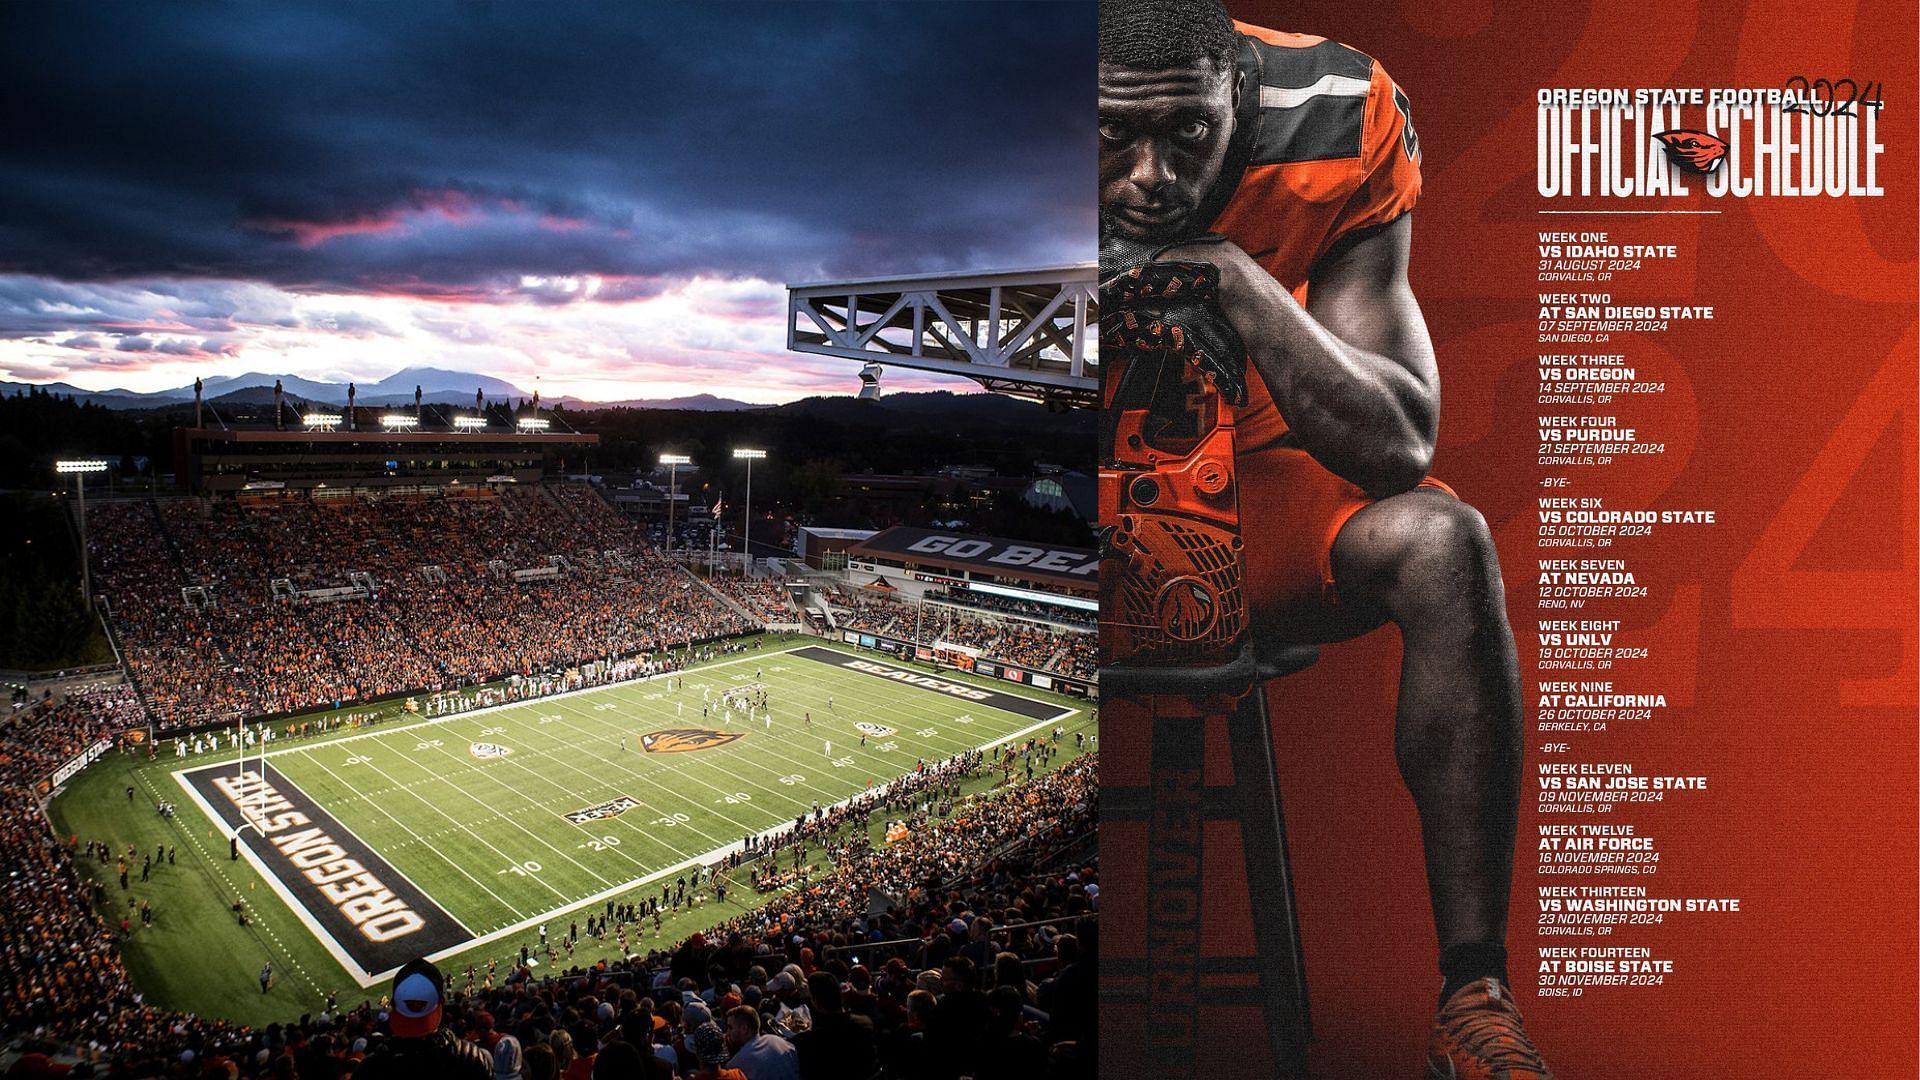 The Oregon State Beavers schedule has been released 